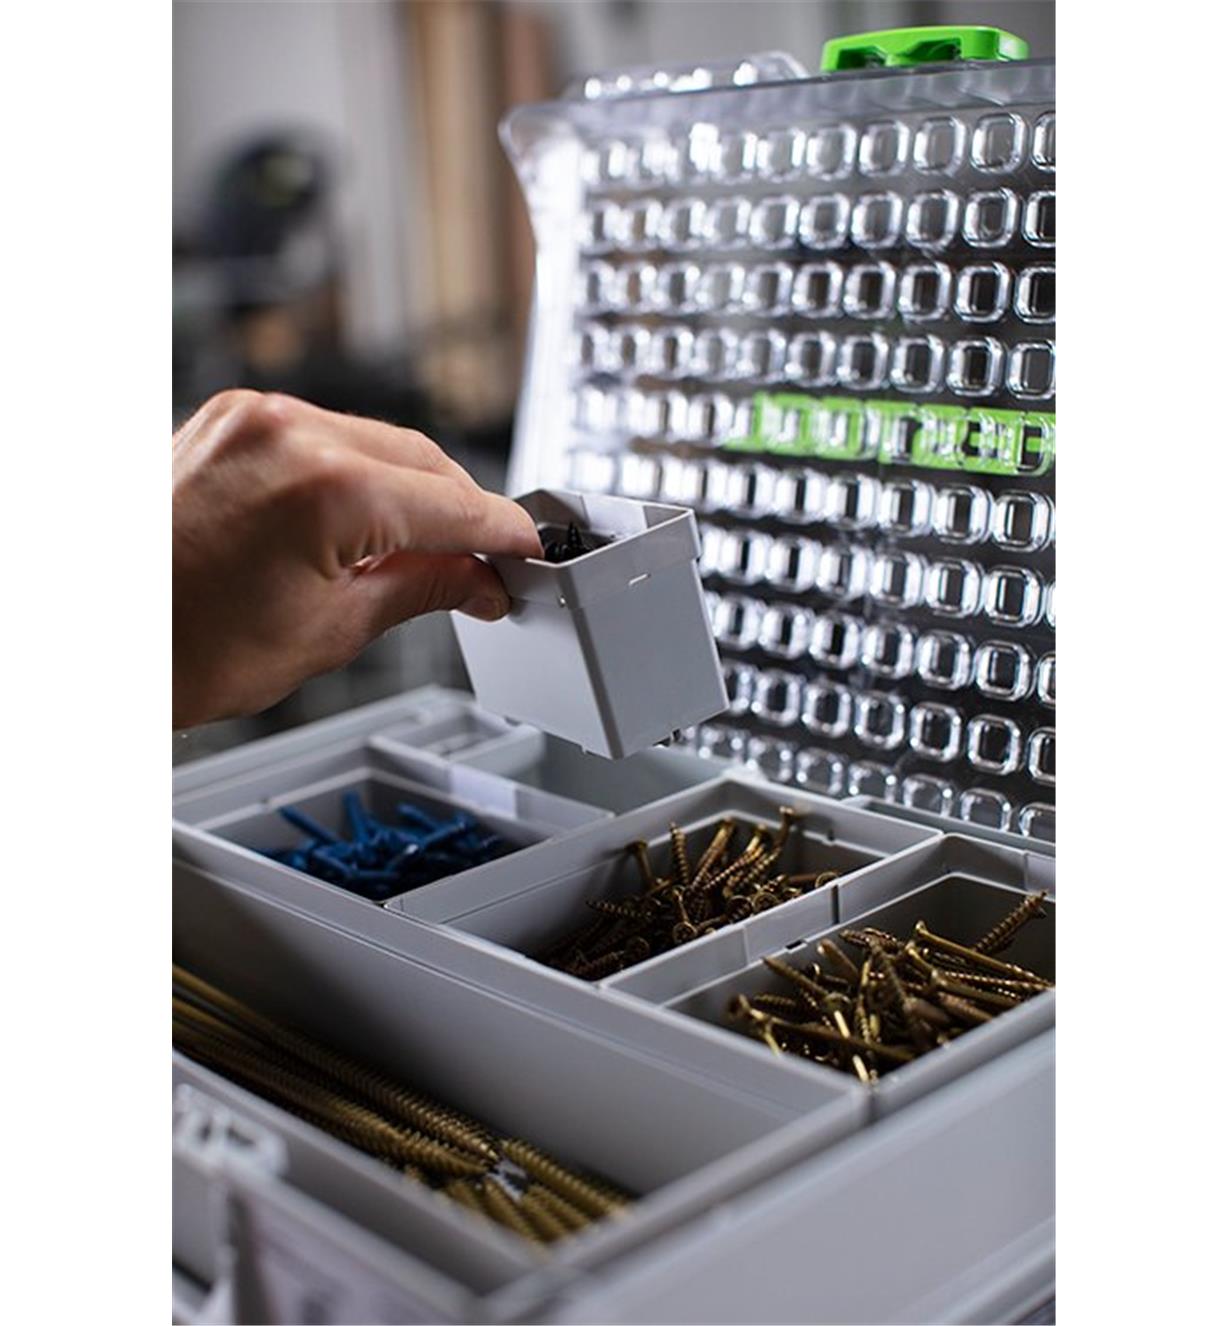 A bin is inserted into an open space in an organizer filled with bins containing hardware